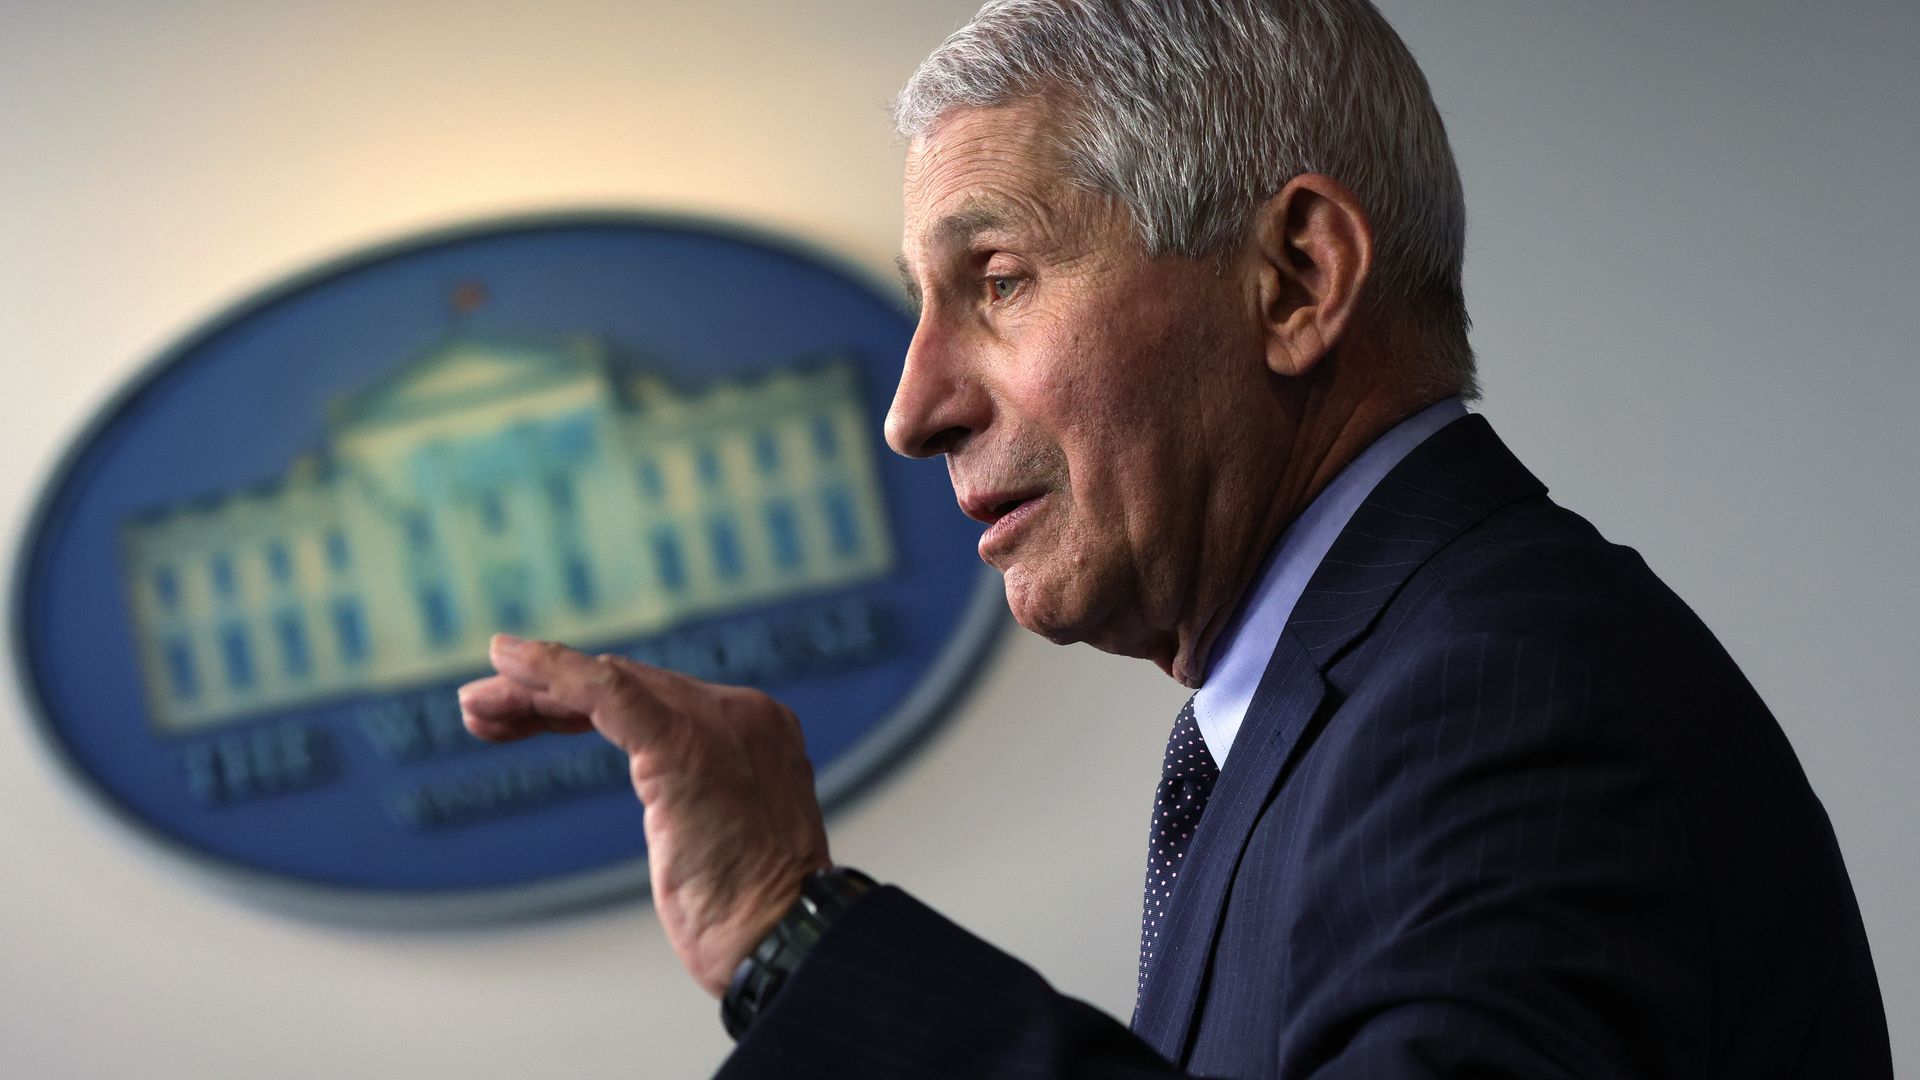 Fauci speaking at the White House in January 2021.